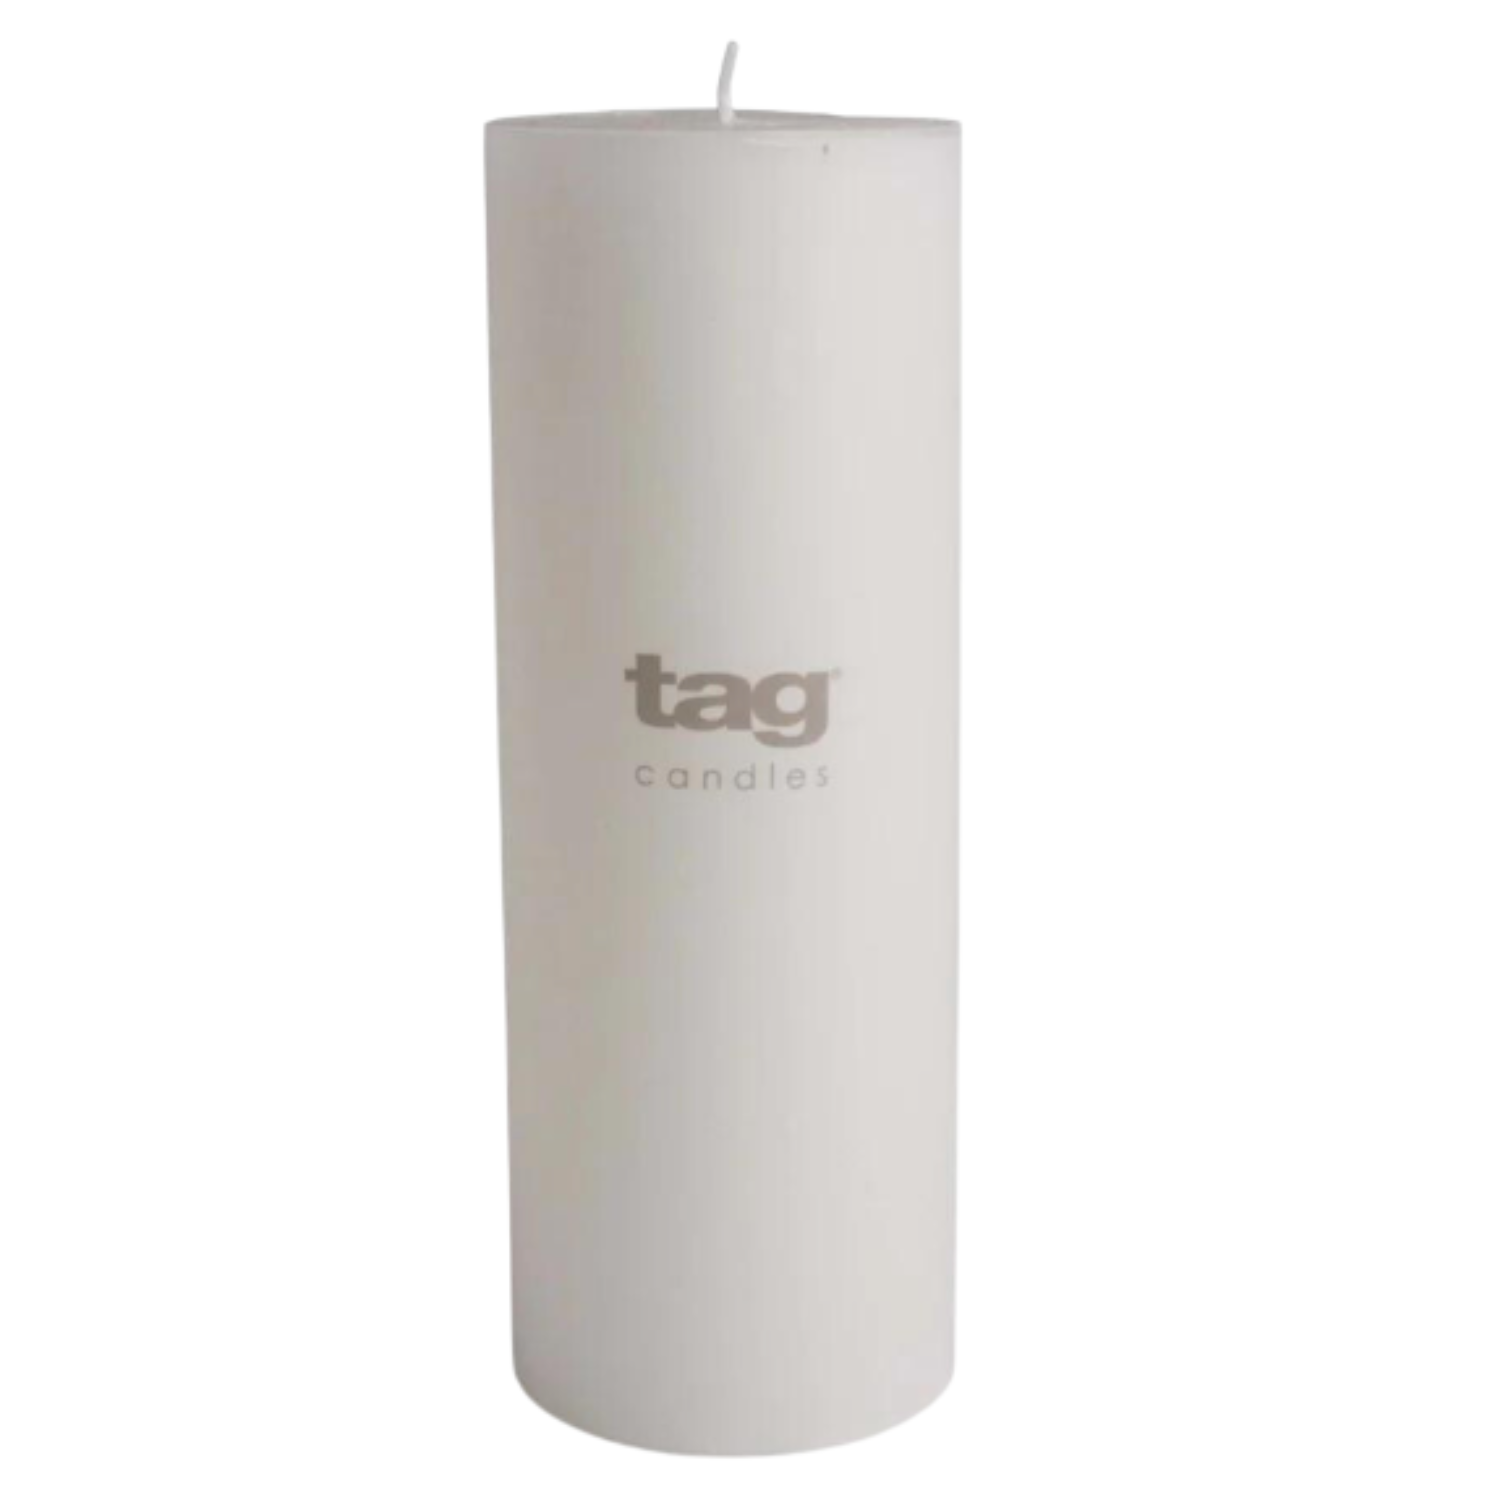 TAG CHAPEL WHITE PILLAR CANDLE